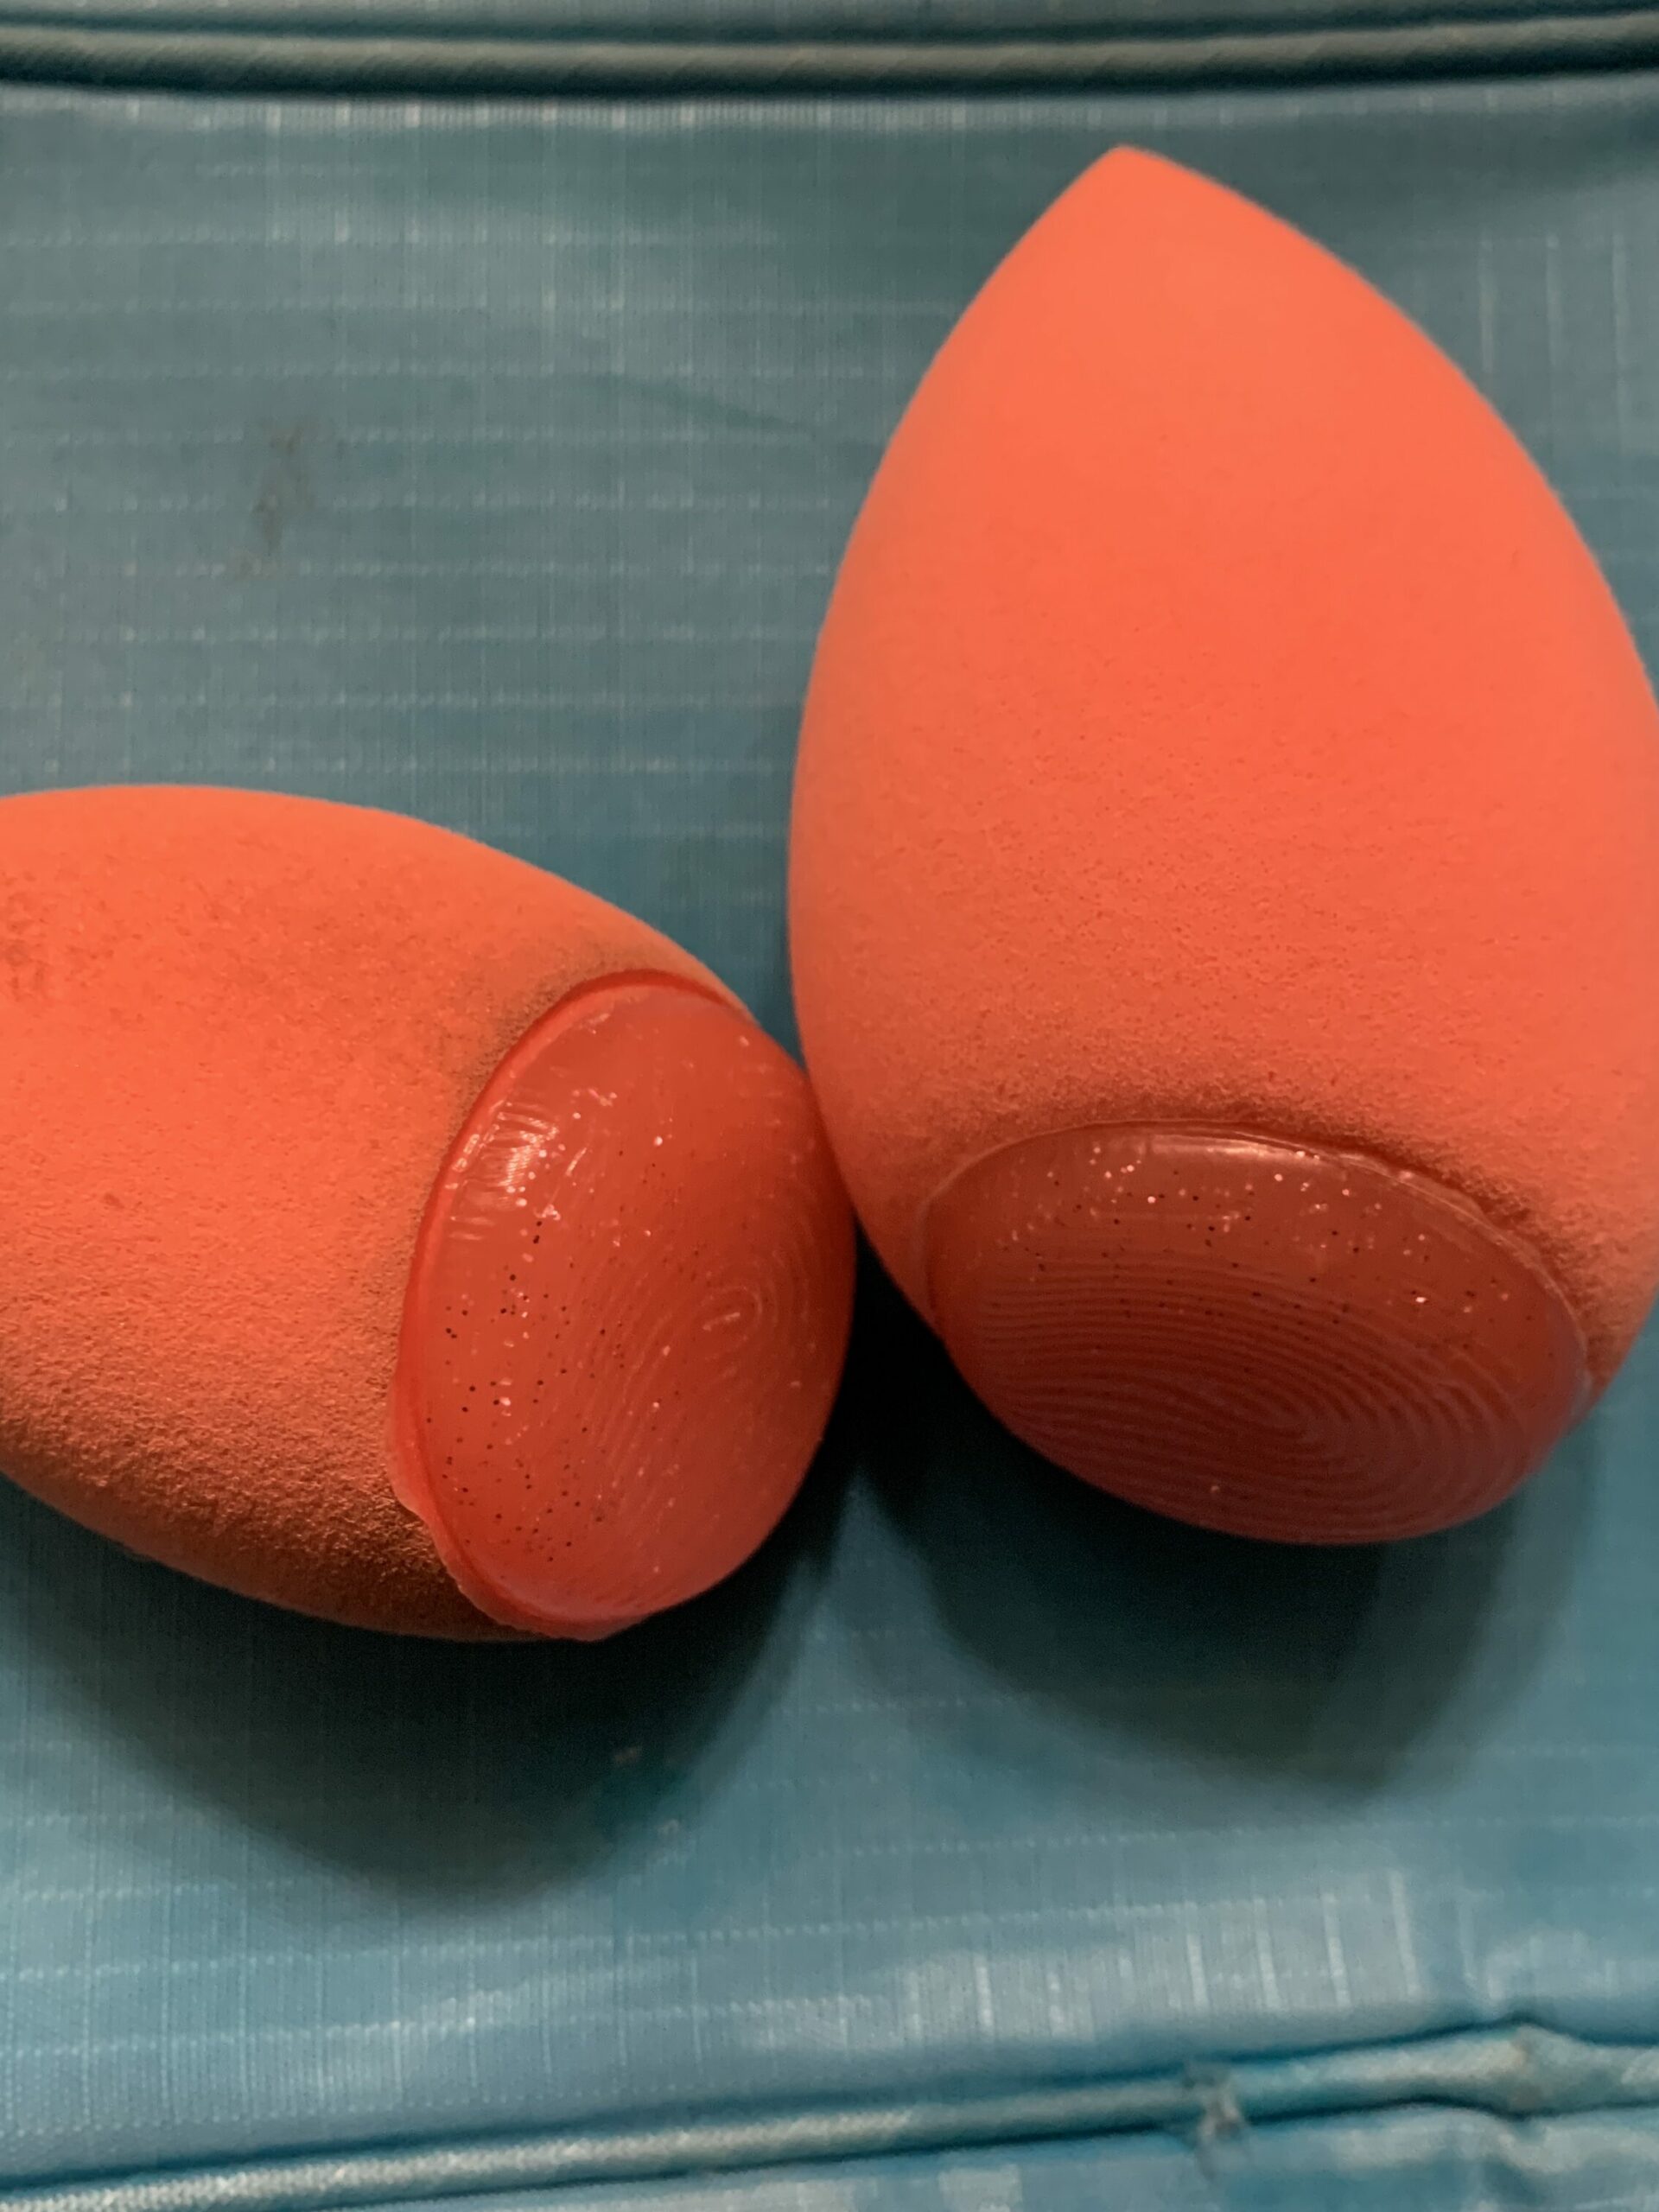 Real Techniques miracle mixing sponge